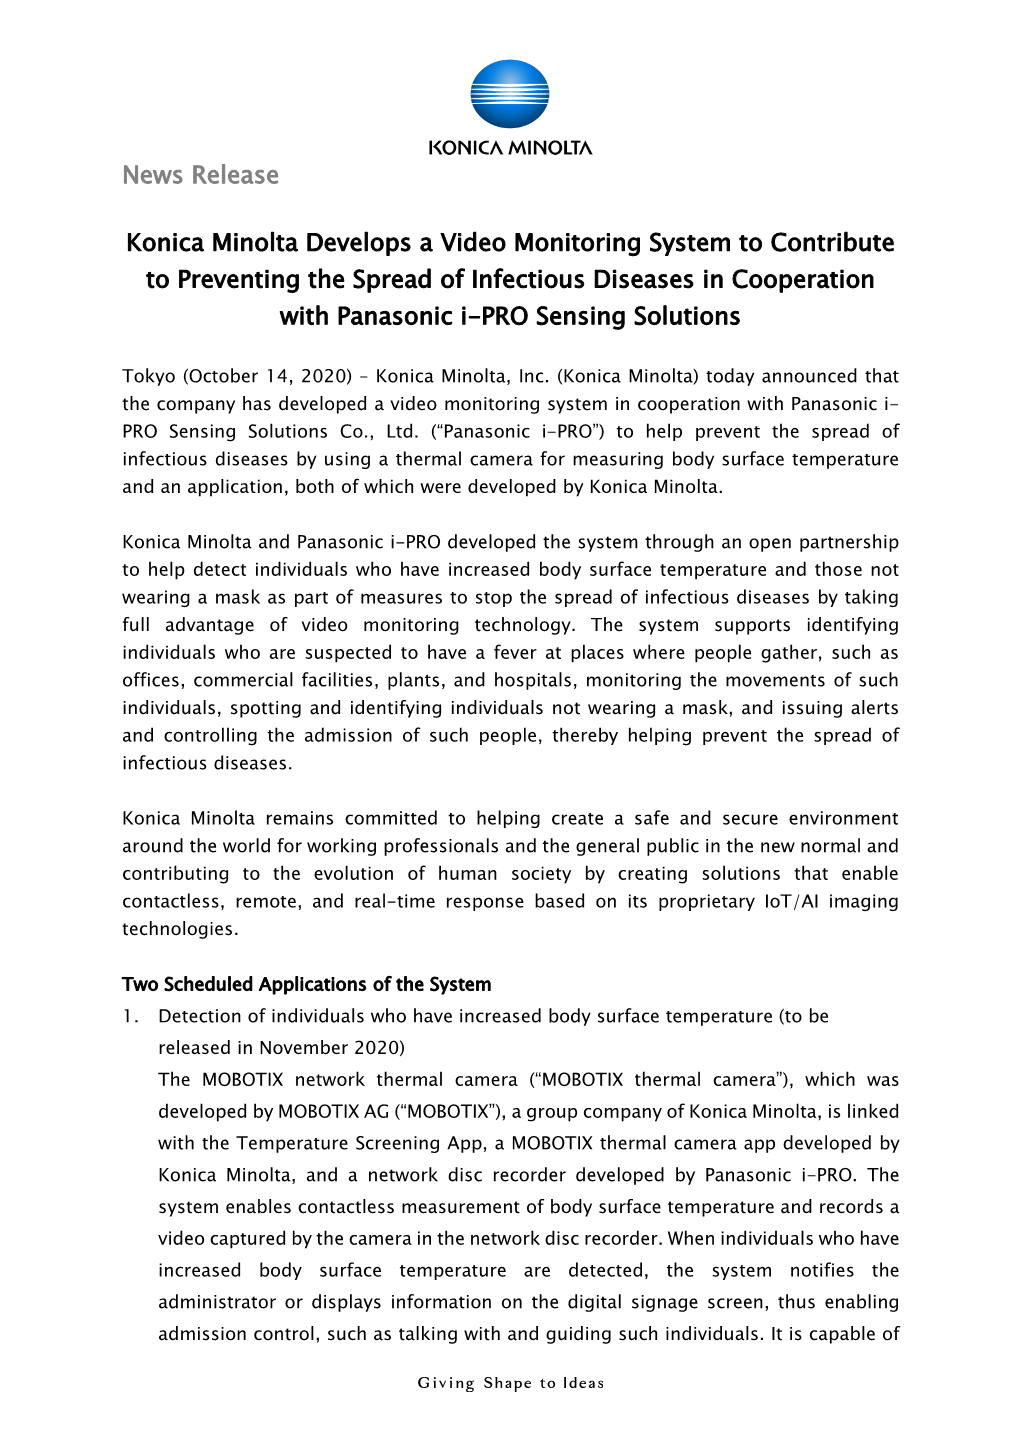 Konica Minolta Develops a Video Monitoring System to Contribute to Preventing the Spread of Infectious Diseases in Cooperation with Panasonic I-PRO Sensing Solutions